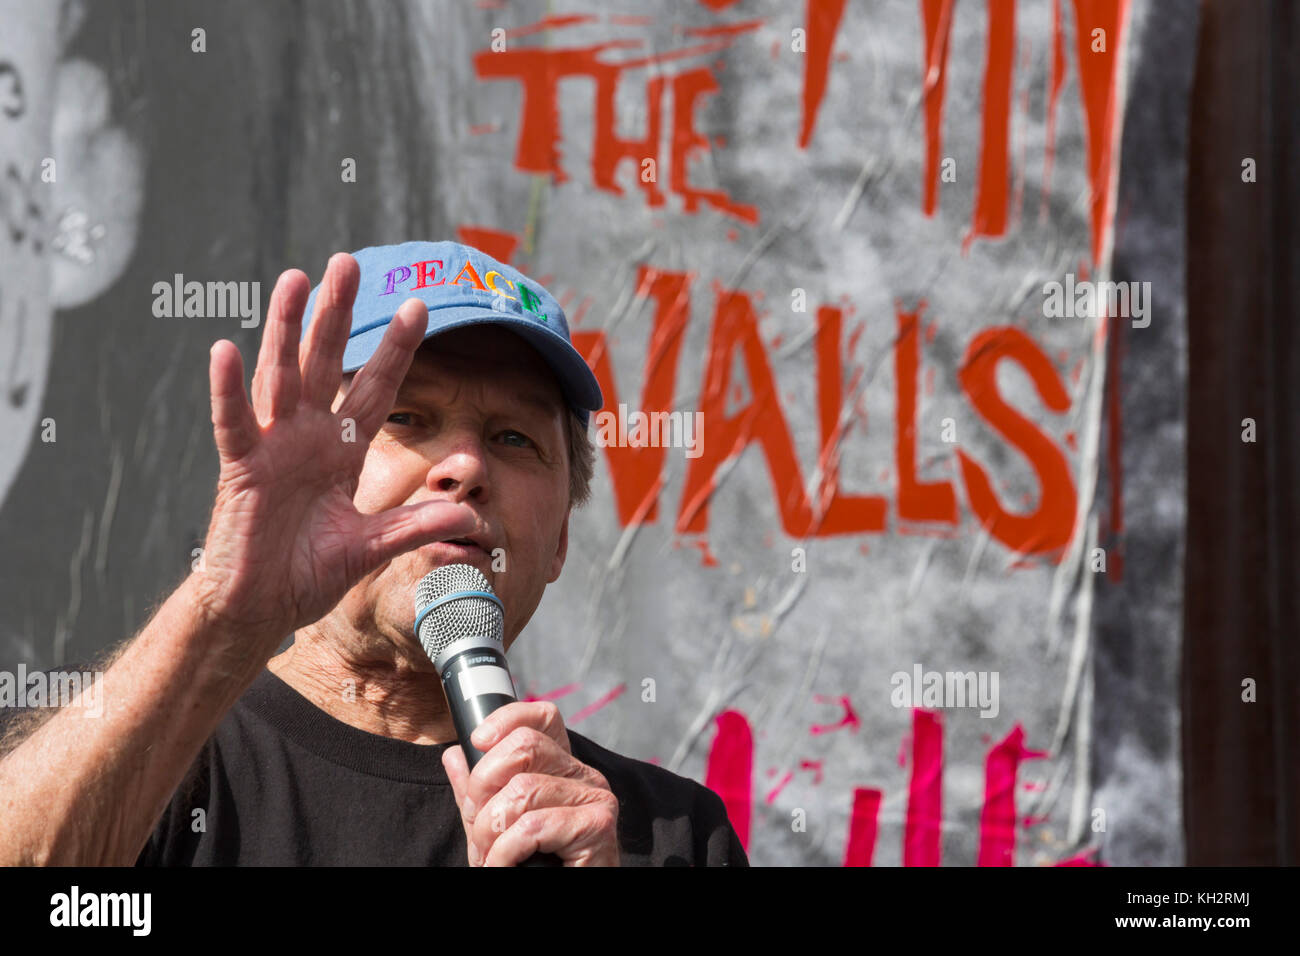 Nogales, Sonora Mexico - 12 November 2017 - Farther Roy Bourgeois speaks at a rally held at the U.S.-Mexico border fence to remember migrants who have died trying to cross the border. Farther Bourgois is the founder of the School of the Americas Watch, which organized the rally. Credit: Jim West/Alamy Live News Stock Photo